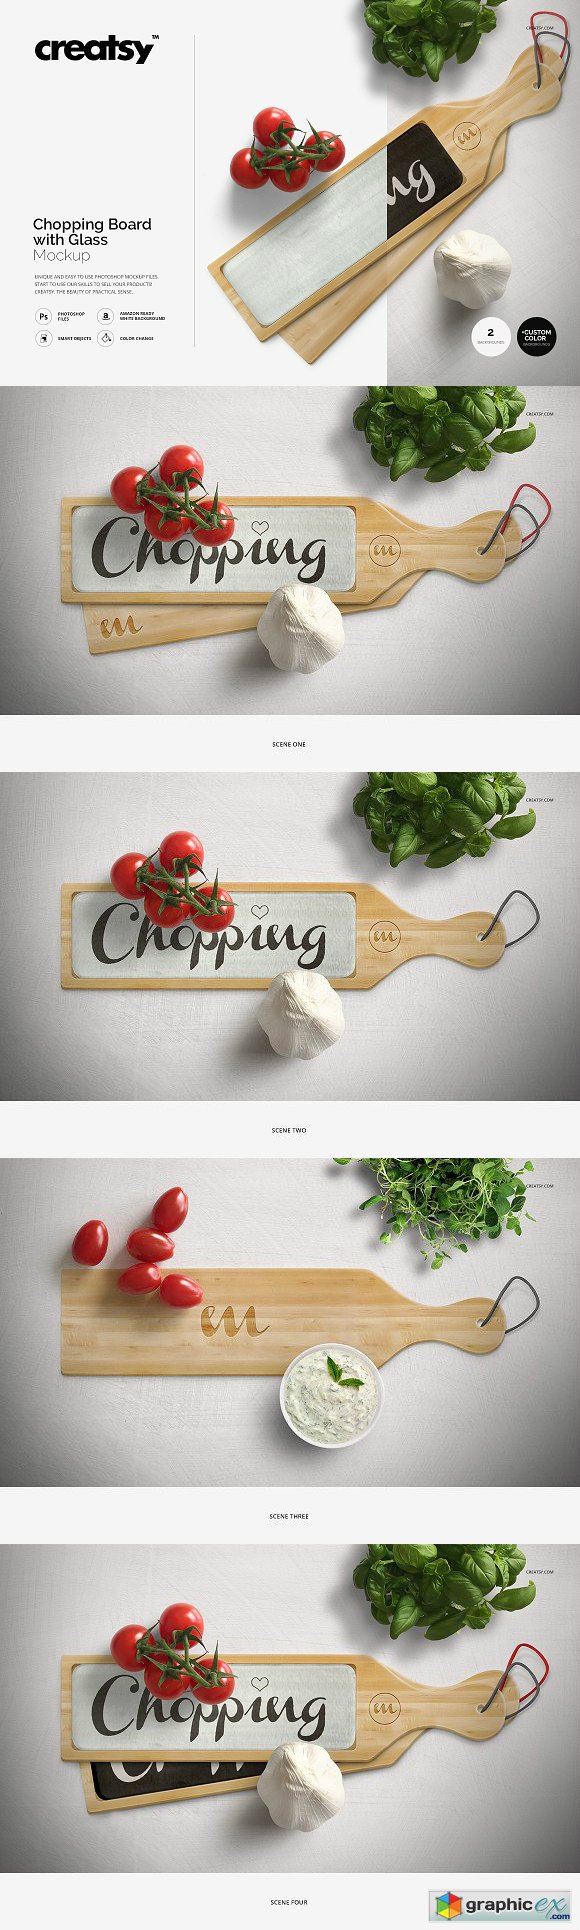 Chopping Board with Glass Mockup Set